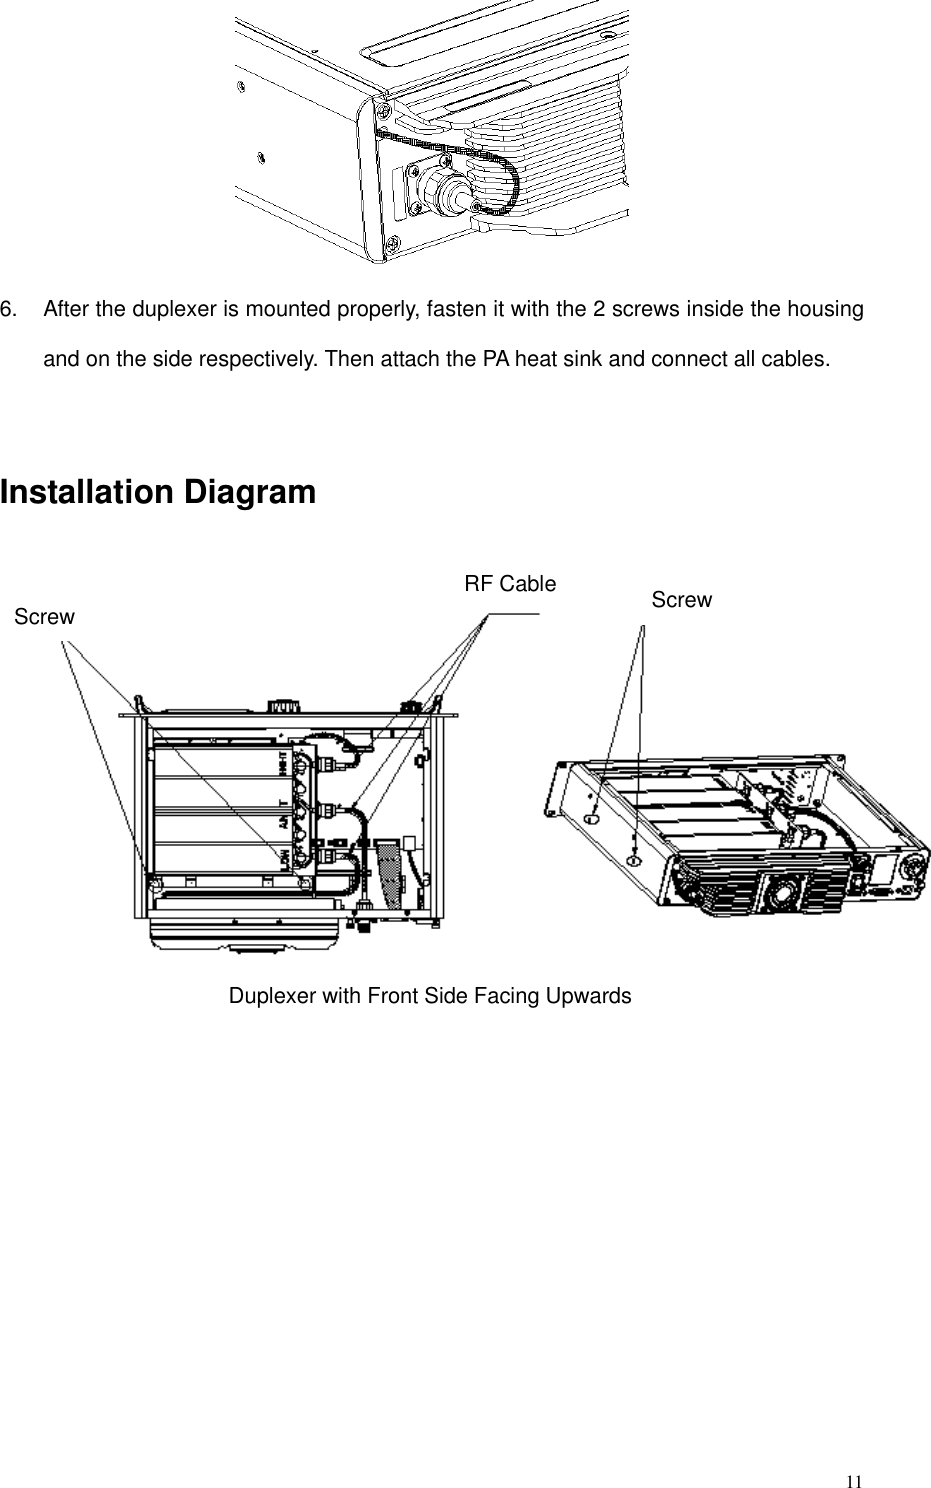 116. After the duplexer is mounted properly, fasten it with the 2 screws inside the housingand on the side respectively. Then attach the PA heat sink and connect all cables.Installation DiagramDuplexer with Front Side Facing UpwardsScrewRF Cable Screw